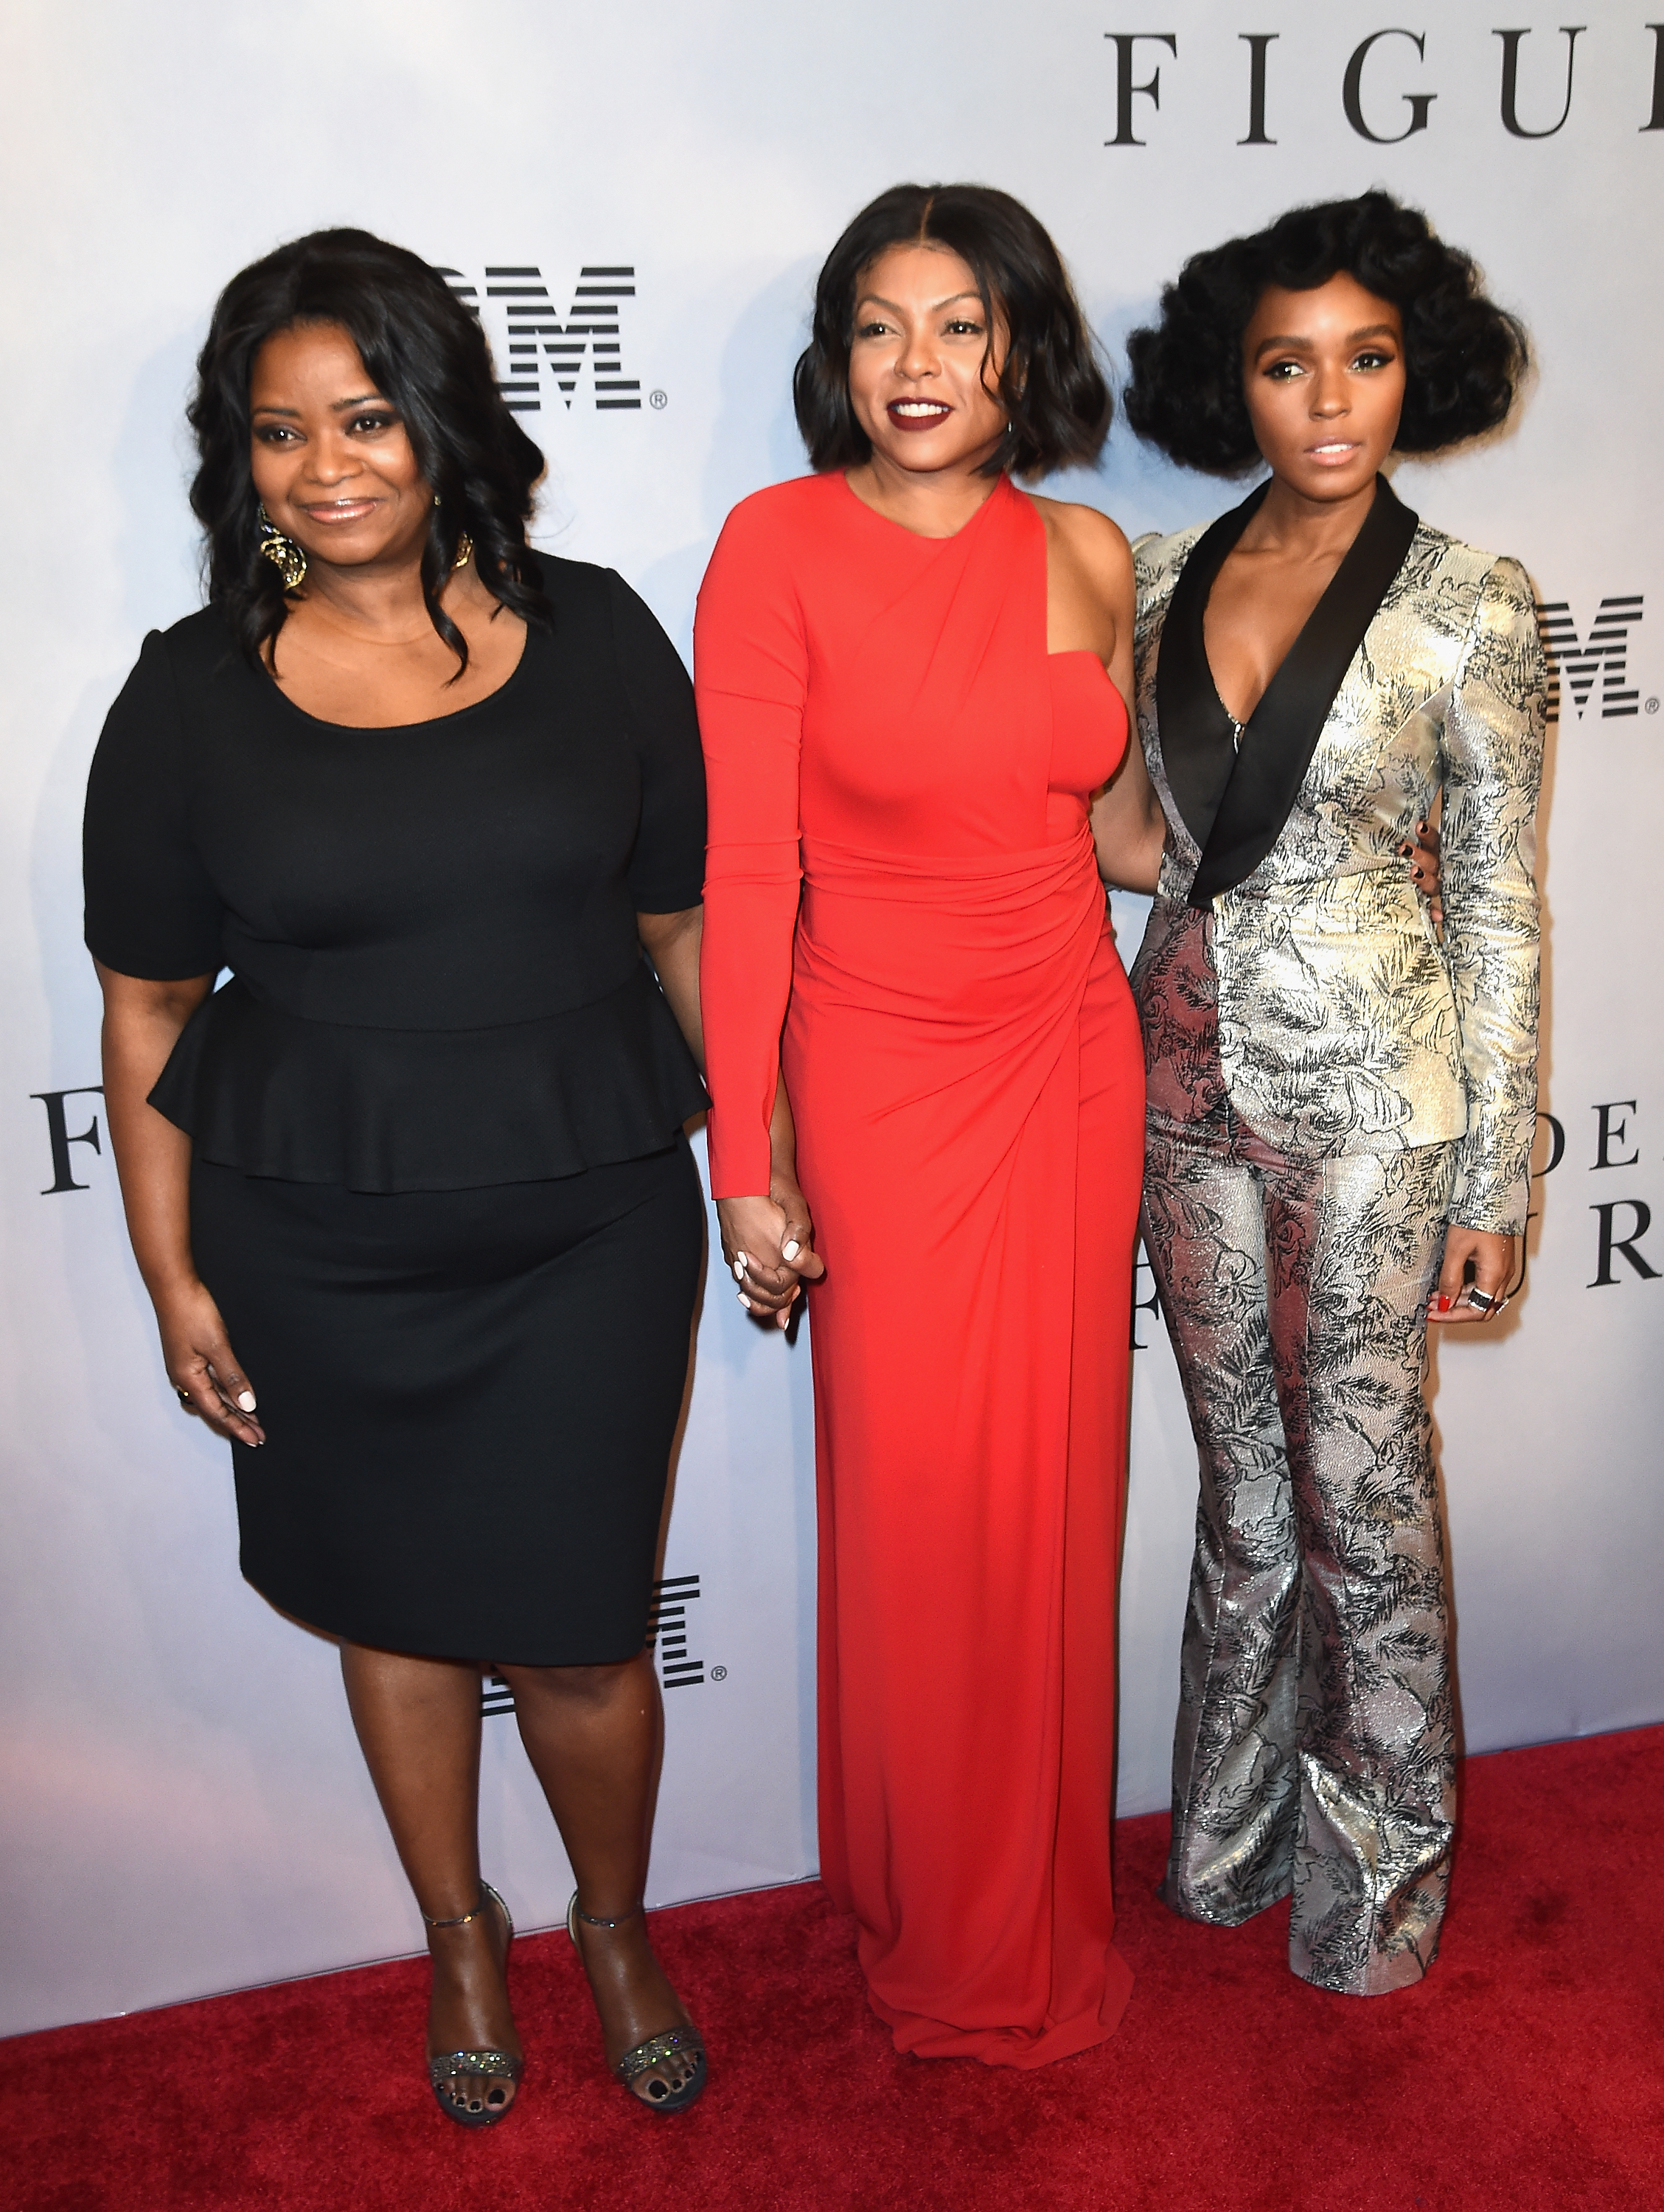 NEW YORK, NY - DECEMBER 10:  Octavia Spencer, Taraji P. Henson and Janelle Monae attends the "Hidden Figures" New York Special Screening on December 10, 2016 in New York City.  (Photo by Nicholas Hunt/Getty Images) (Nicholas Hunt—Getty Images)